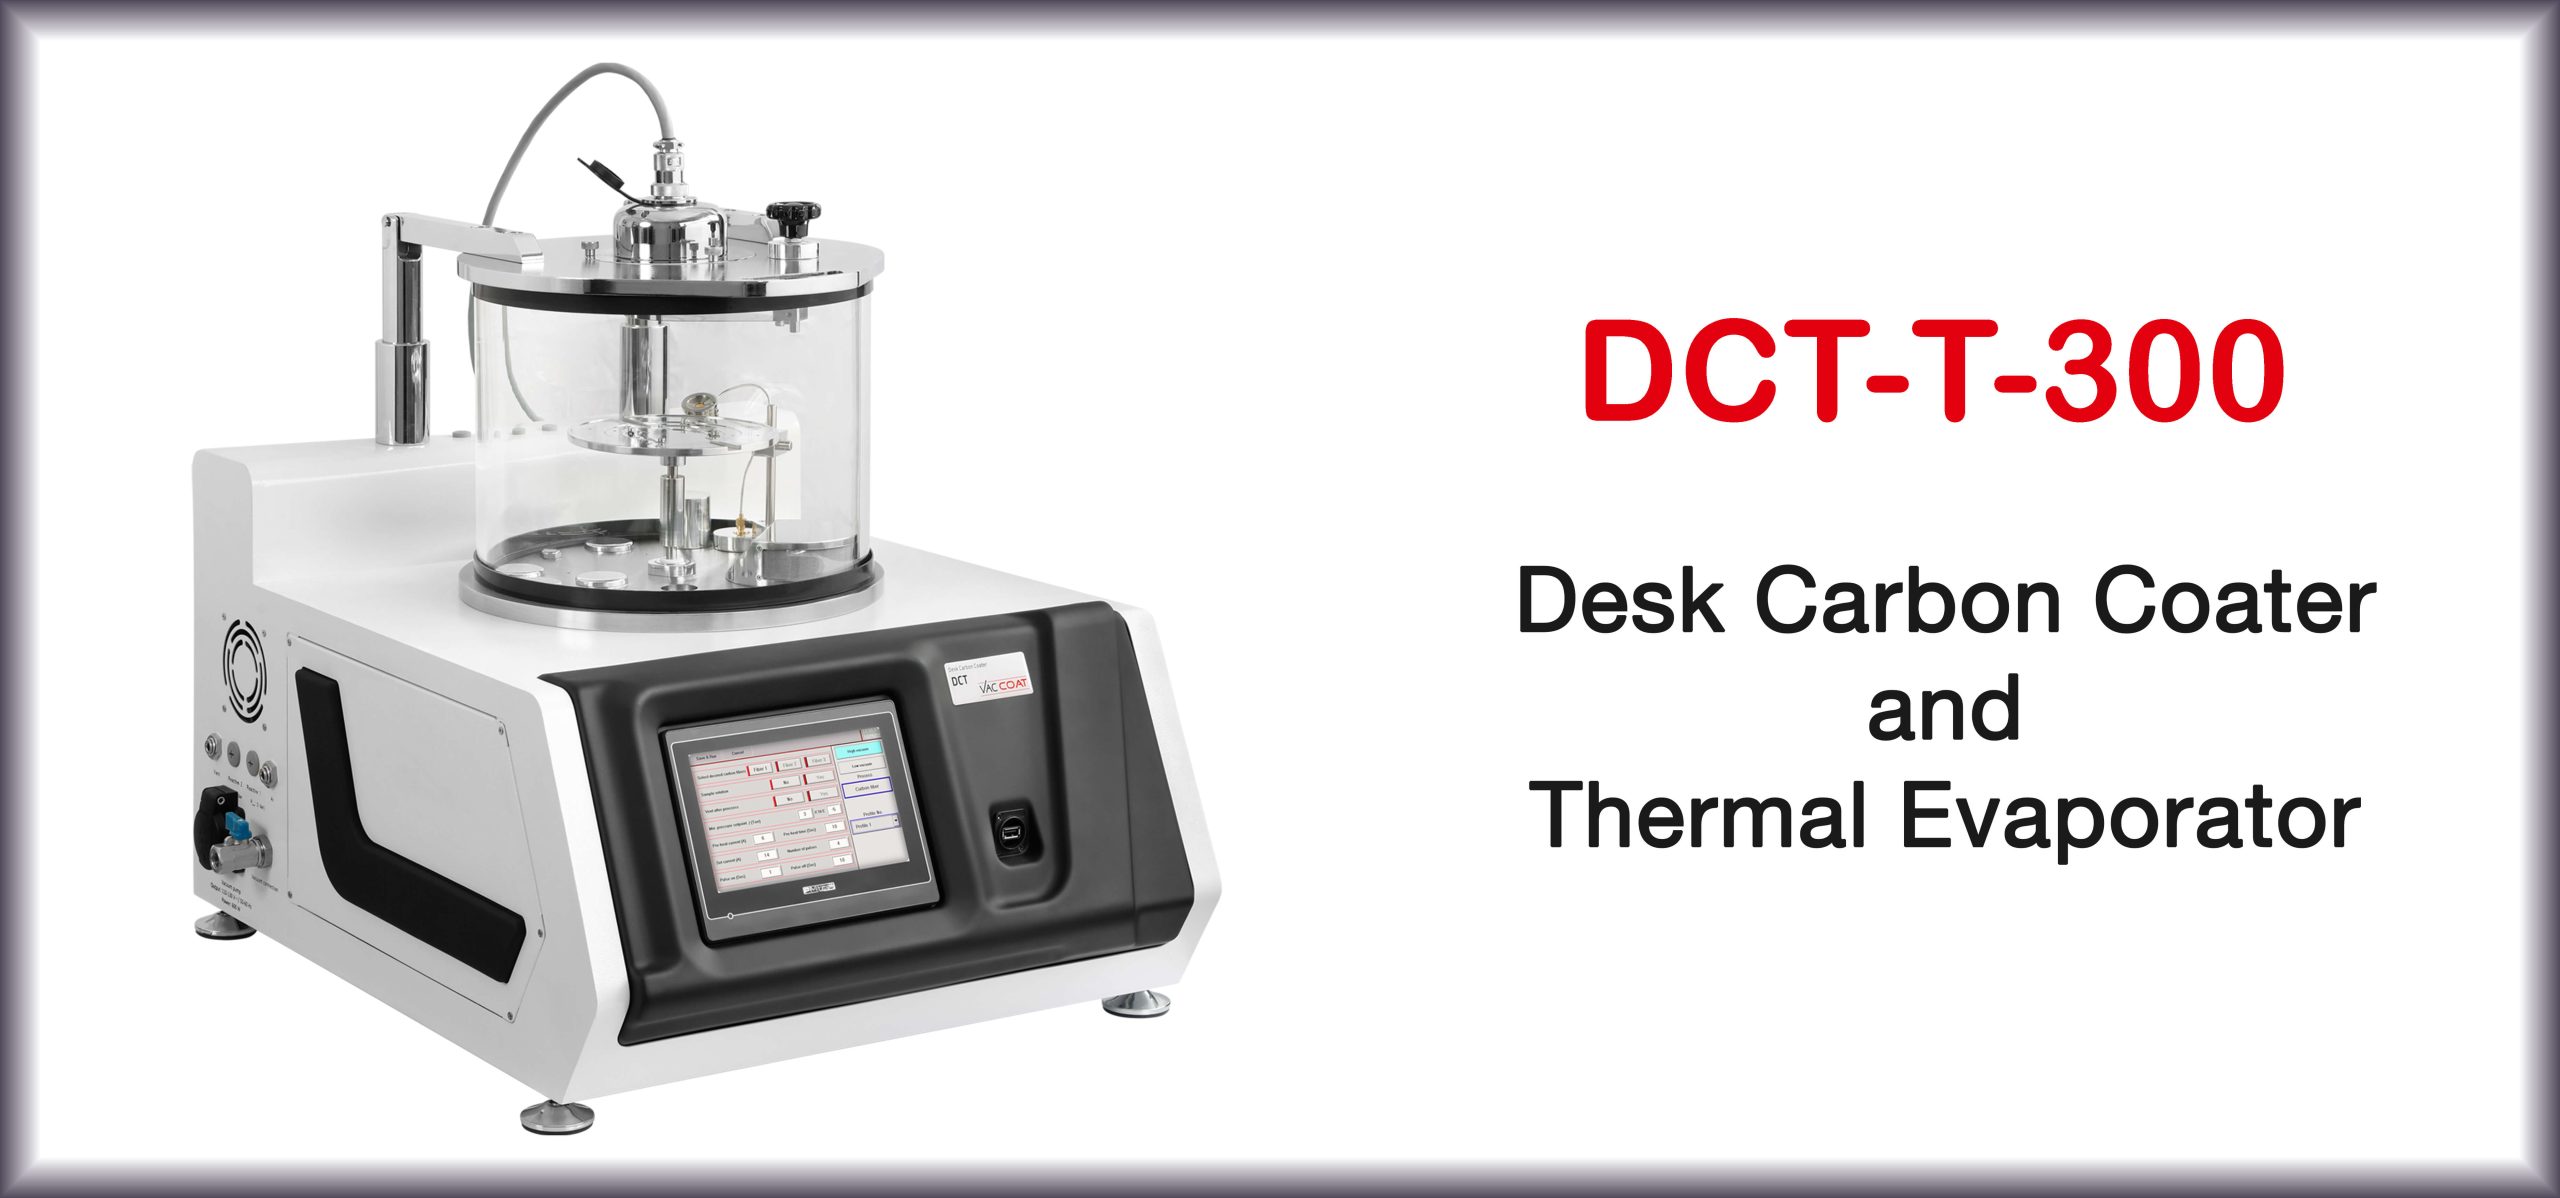 DCT-T-300 | Turbo Pumped Carbon Coater and Thermal Evaporator | New Large DCT Model | Desk Carbon Coater and Thermal Evaporator